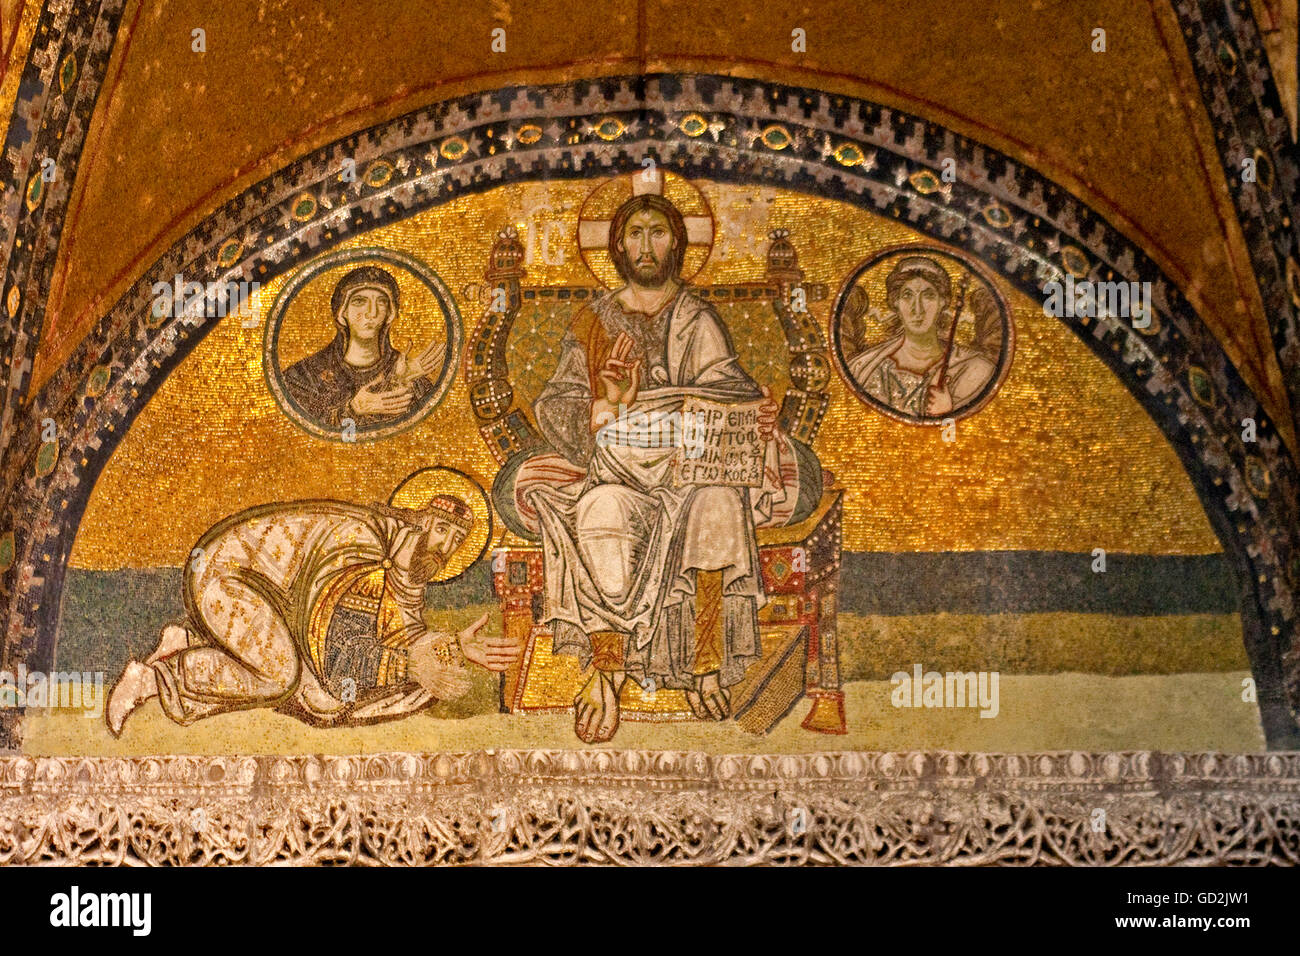 fine arts, religious art, Christ mosaic, Hagia Sophia, Istanbul, Artist's Copyright has not to be cleared Stock Photo